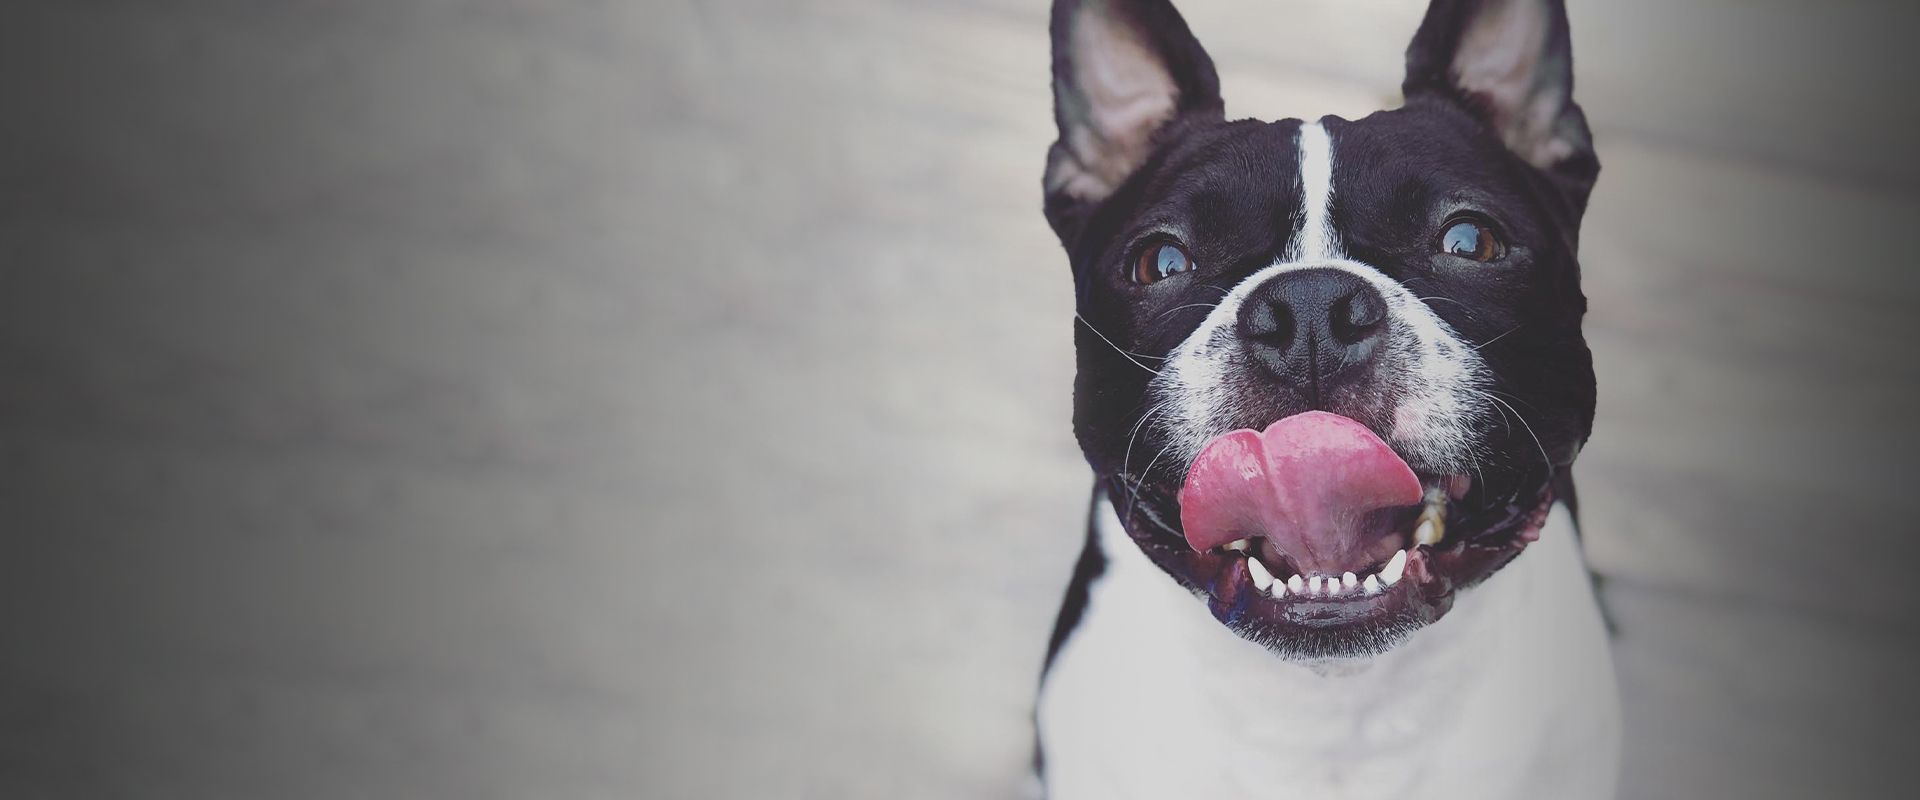 adorable smiling frenchie dog looking at the camera